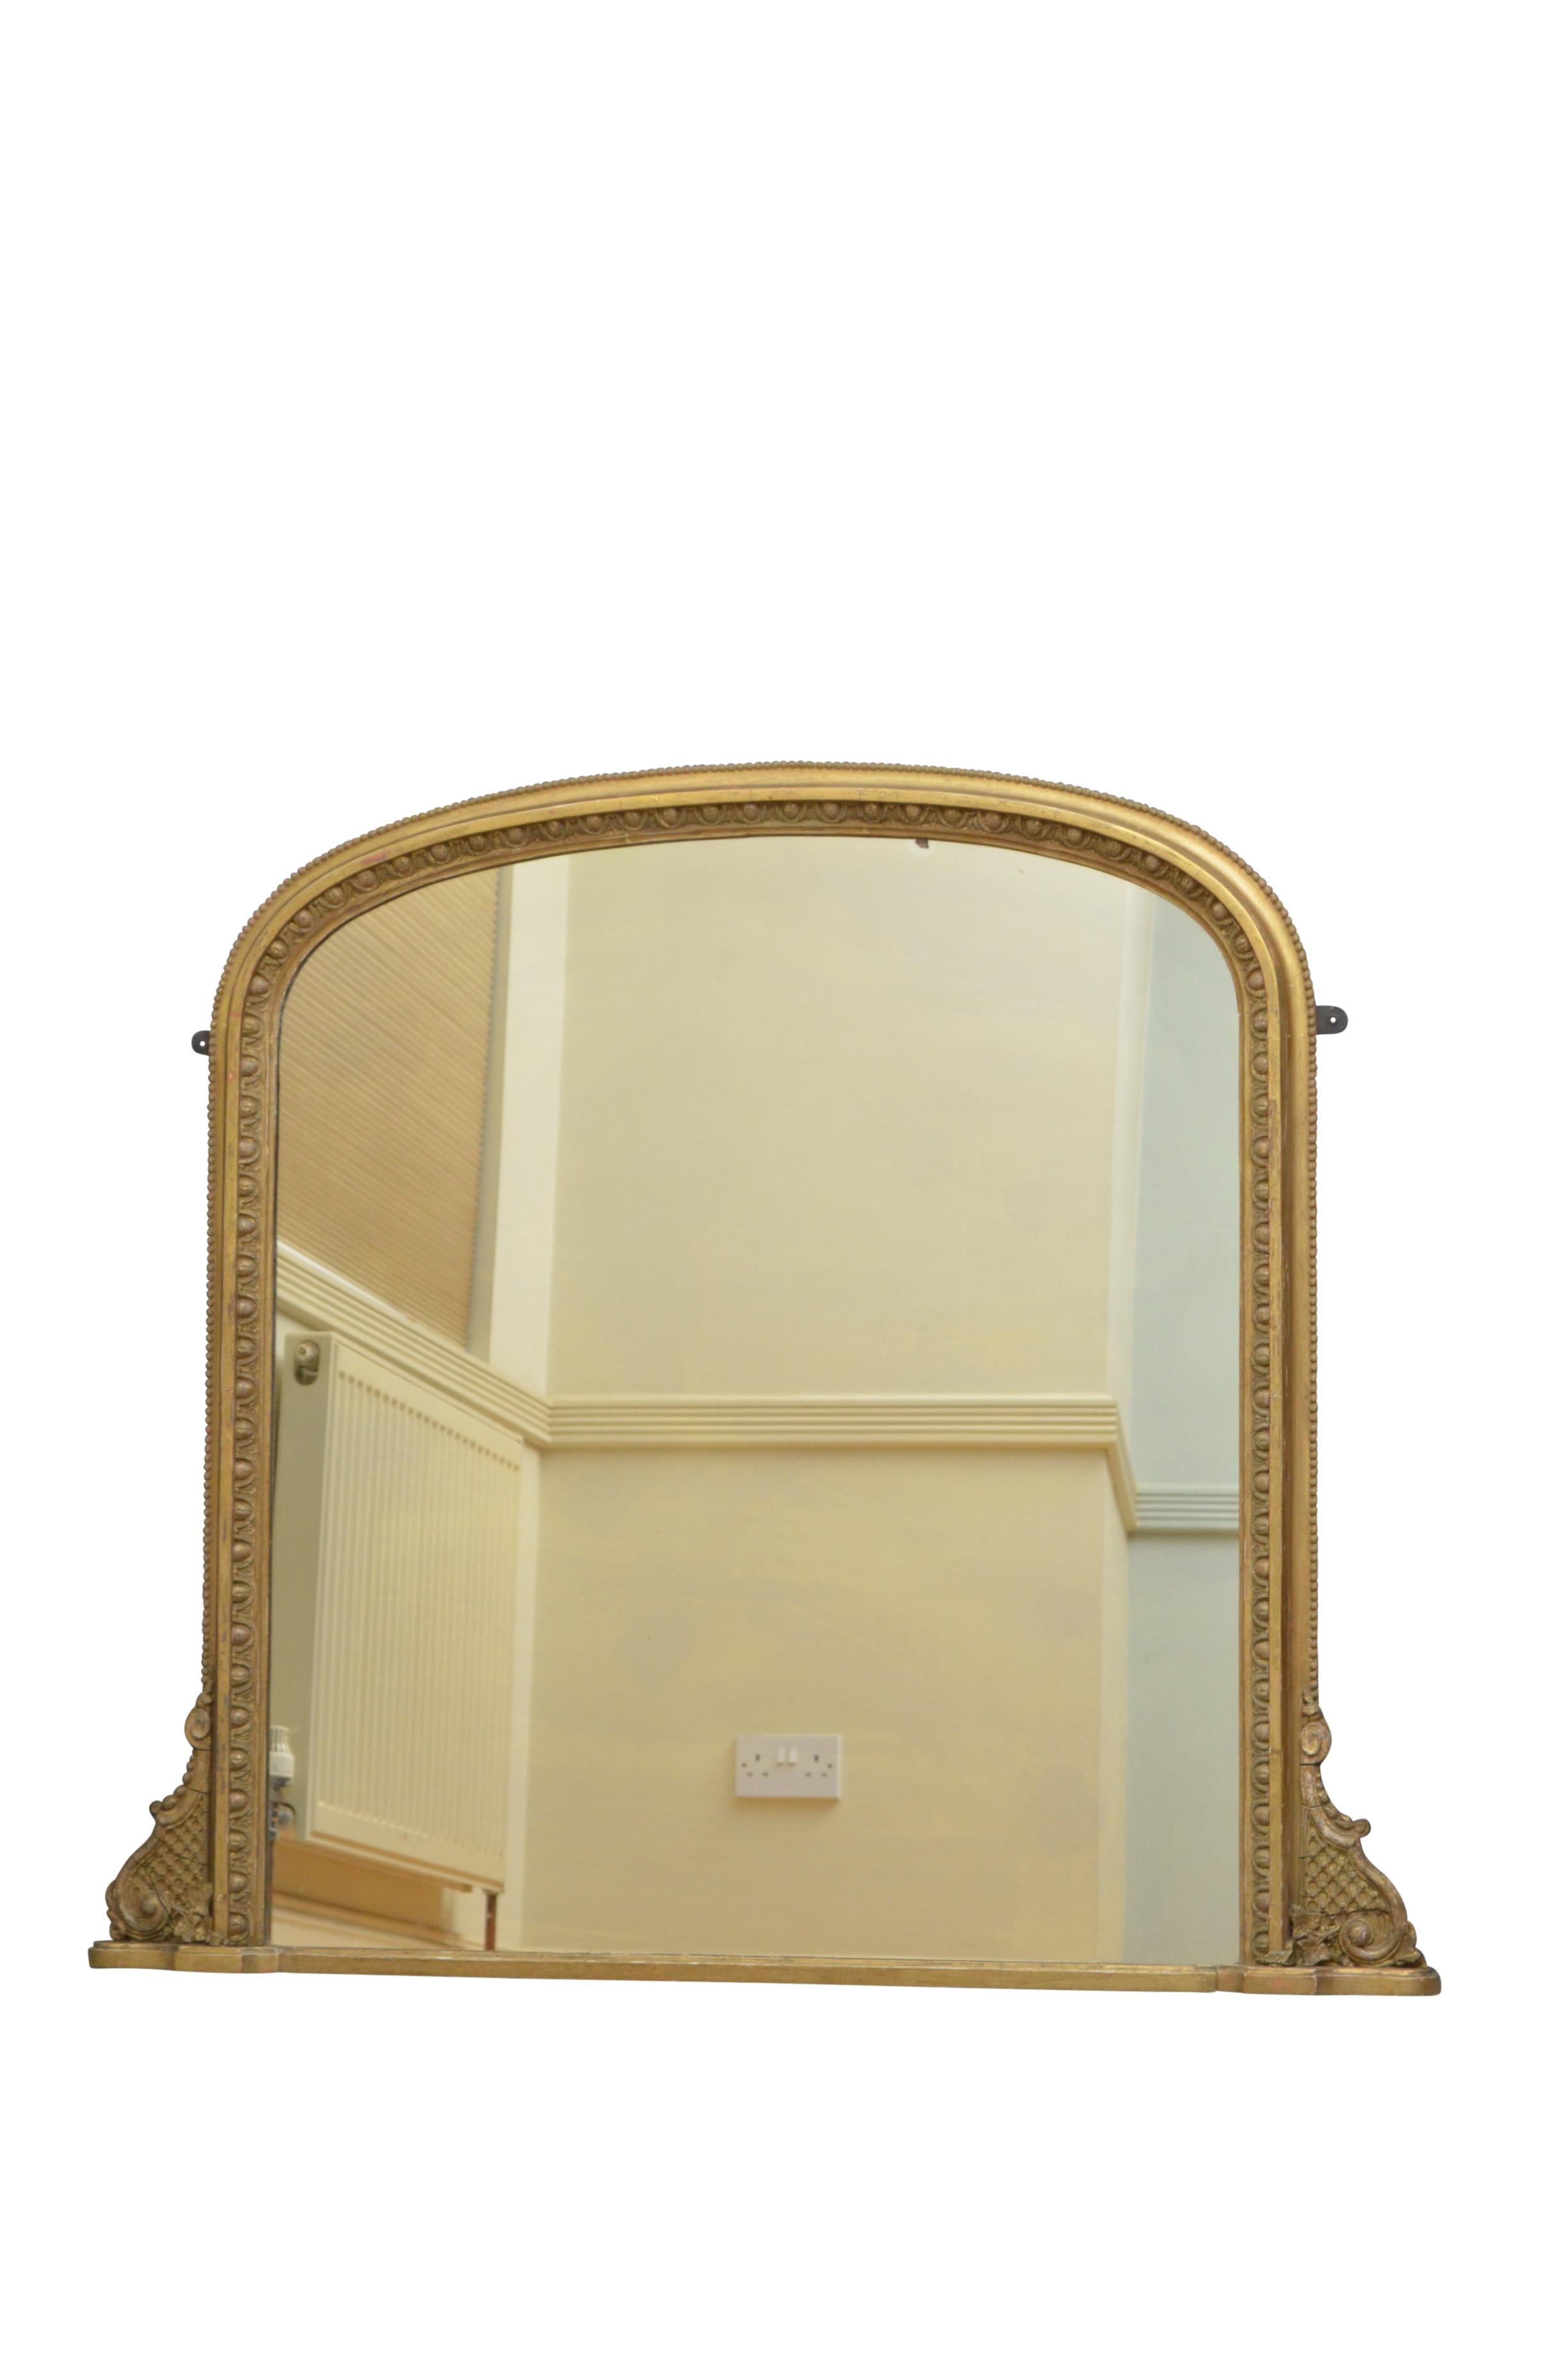 K0381 Victorian gilded wall mirror in Regency taste, having original mirror plate with some foxing in egg and dart carved giltwood frame with fine scrolls to base. This antique mirror retains its original glass, finish and backboards, ready to place